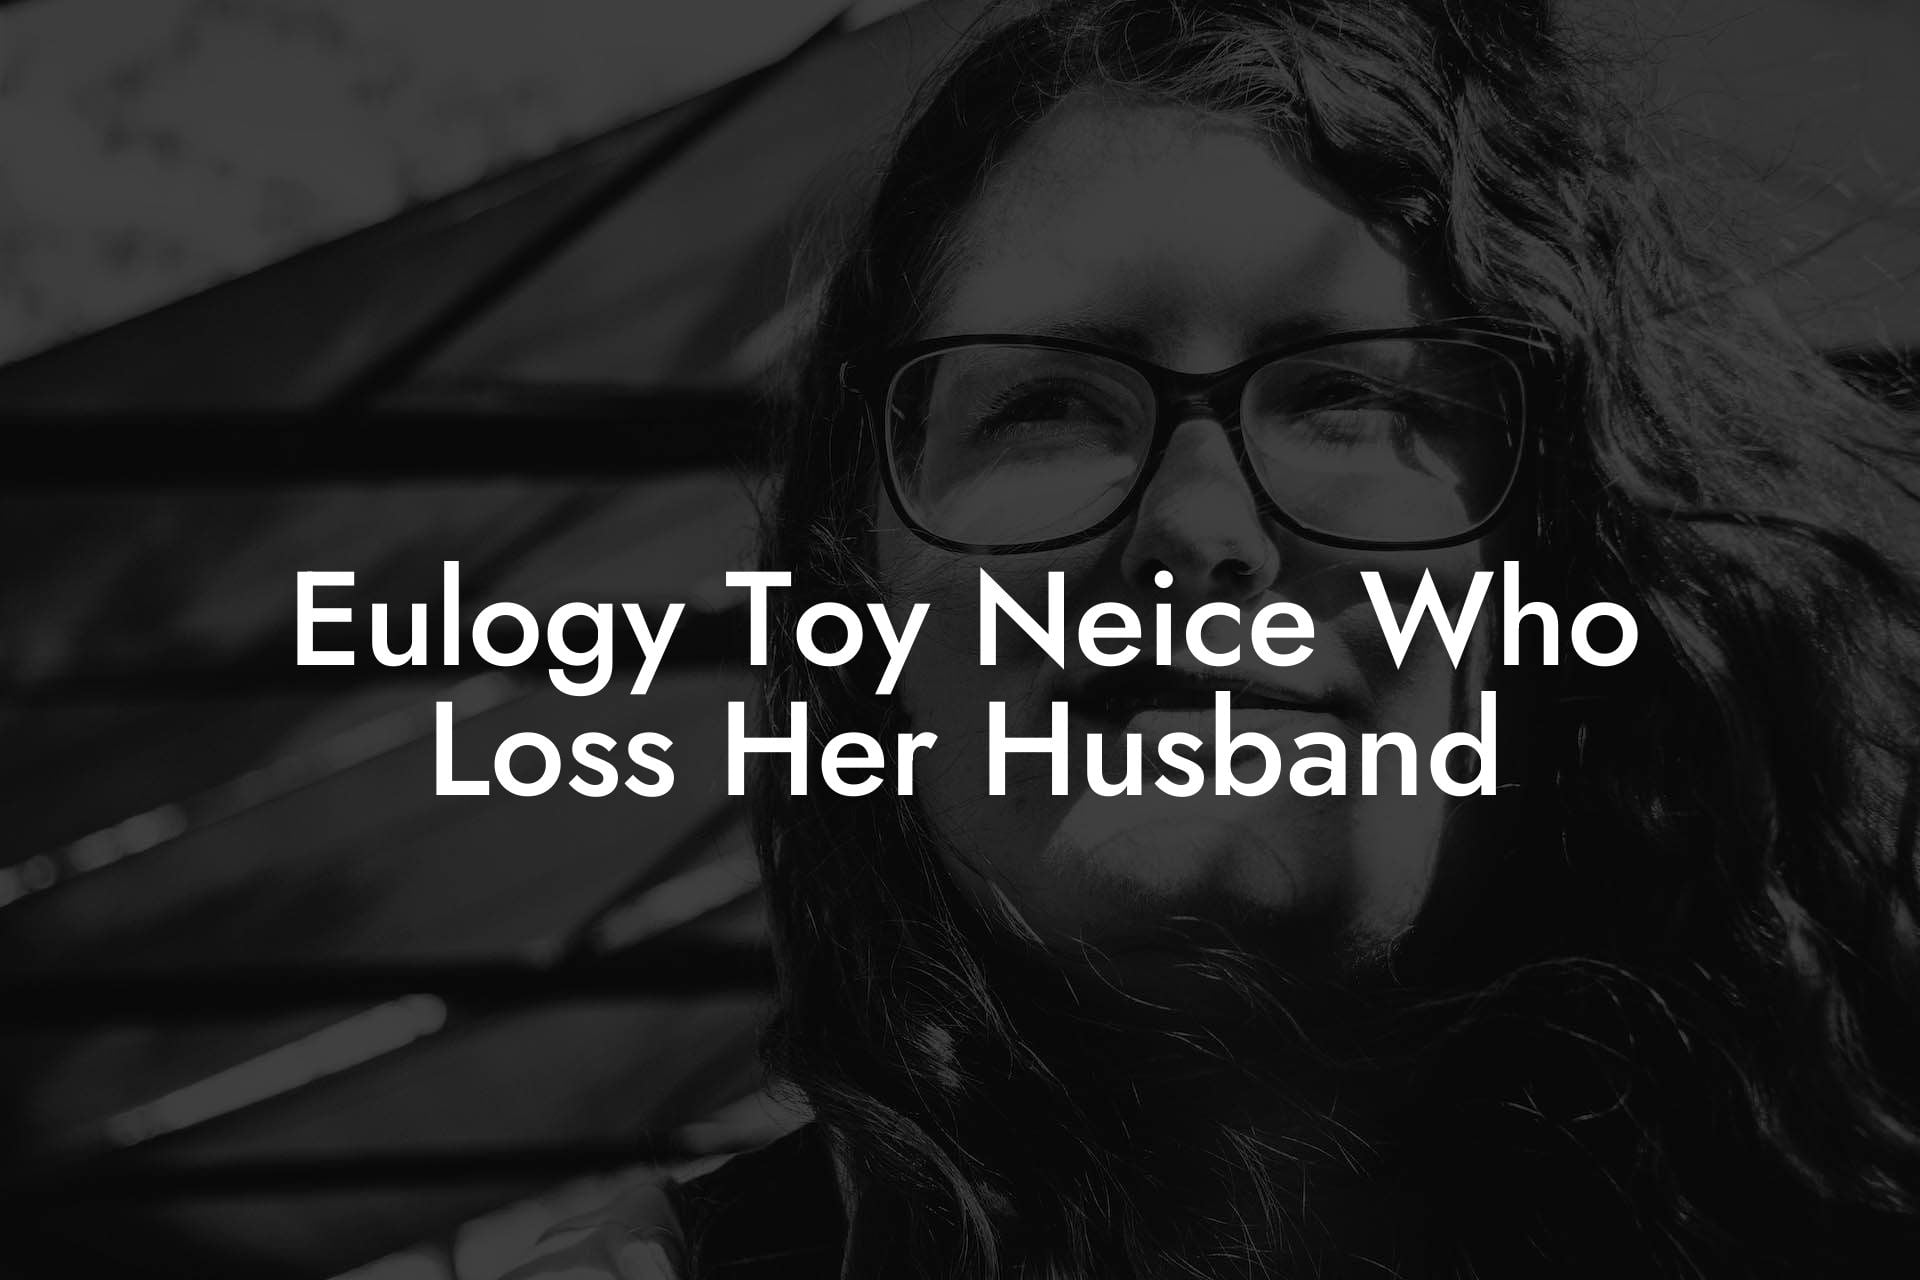 Eulogy Toy Neice Who Loss Her Husband